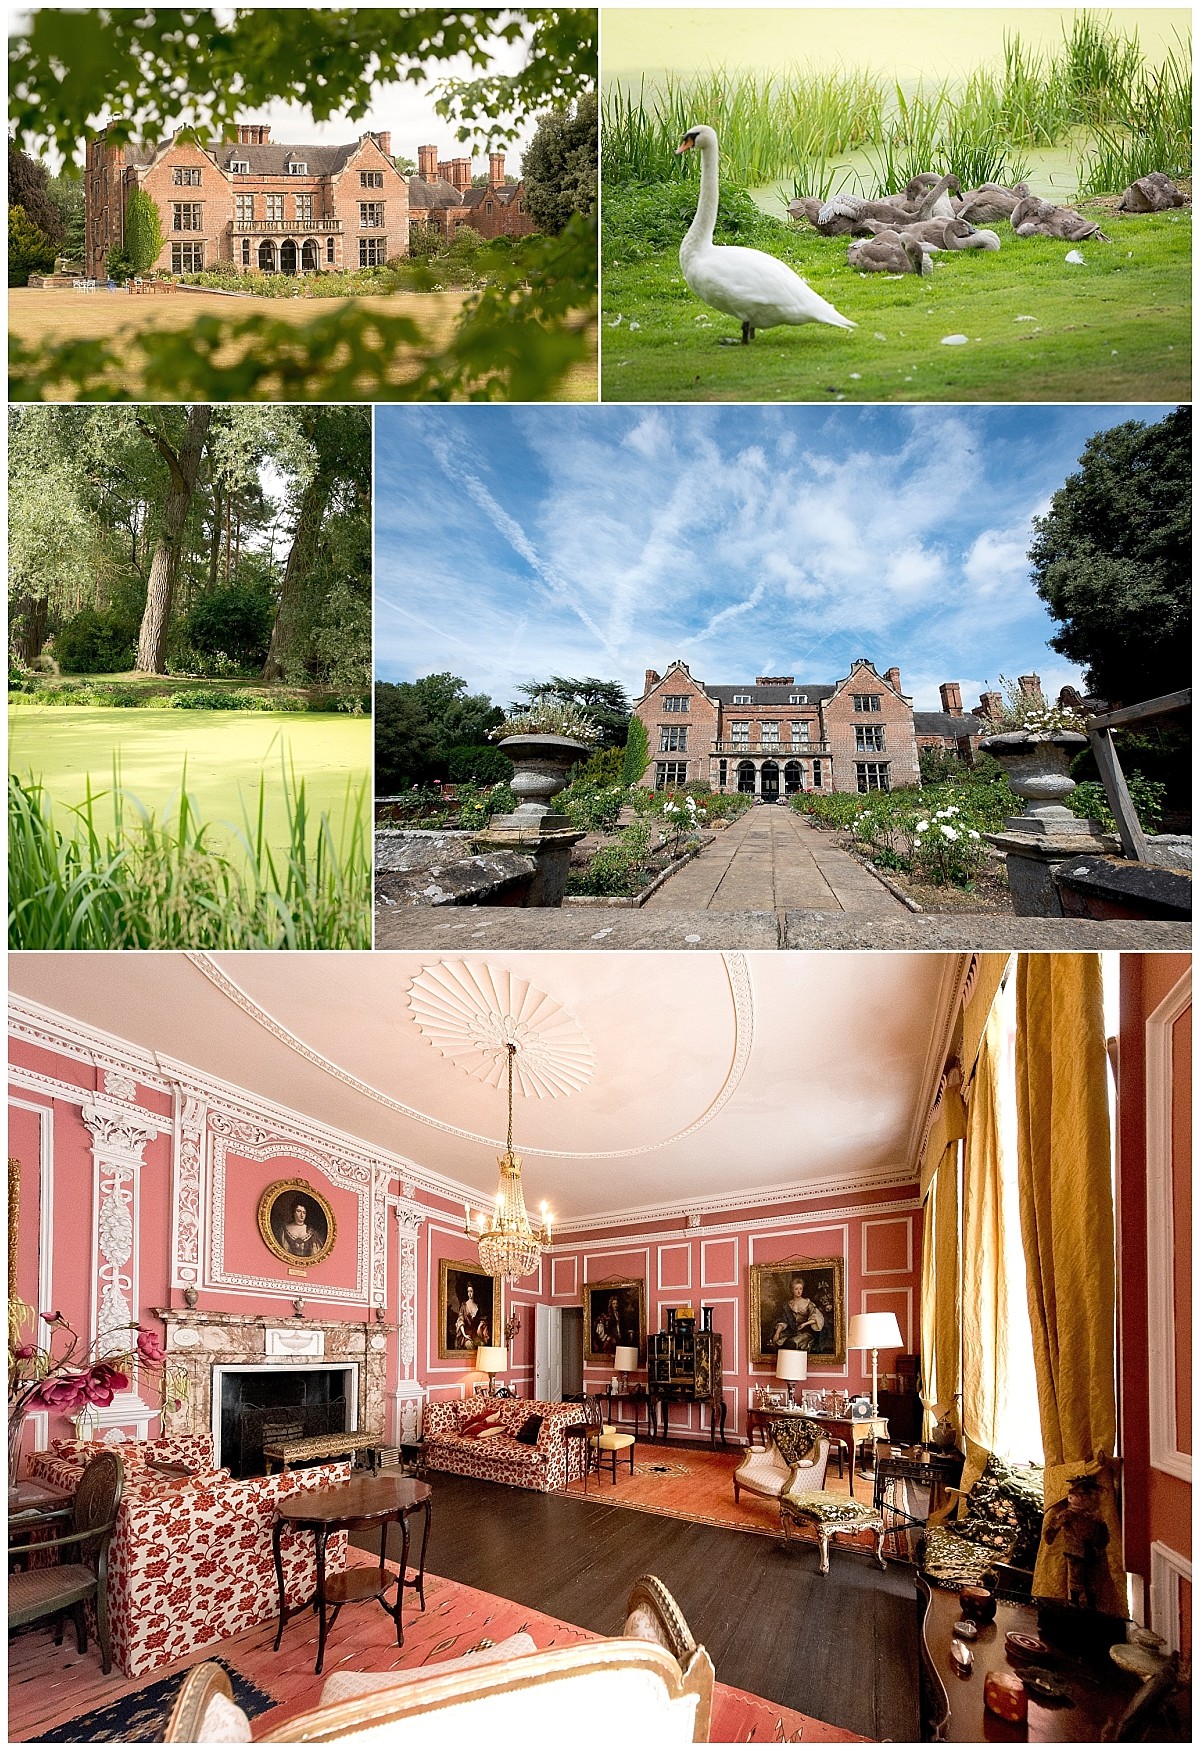 Thrumpton Hall Wedding venue- collage of different pictures in and our from Lorma and Andy's wedding. Has 4 pictures of outside (2 of building, 2 of garden) and one of inside in a pink room